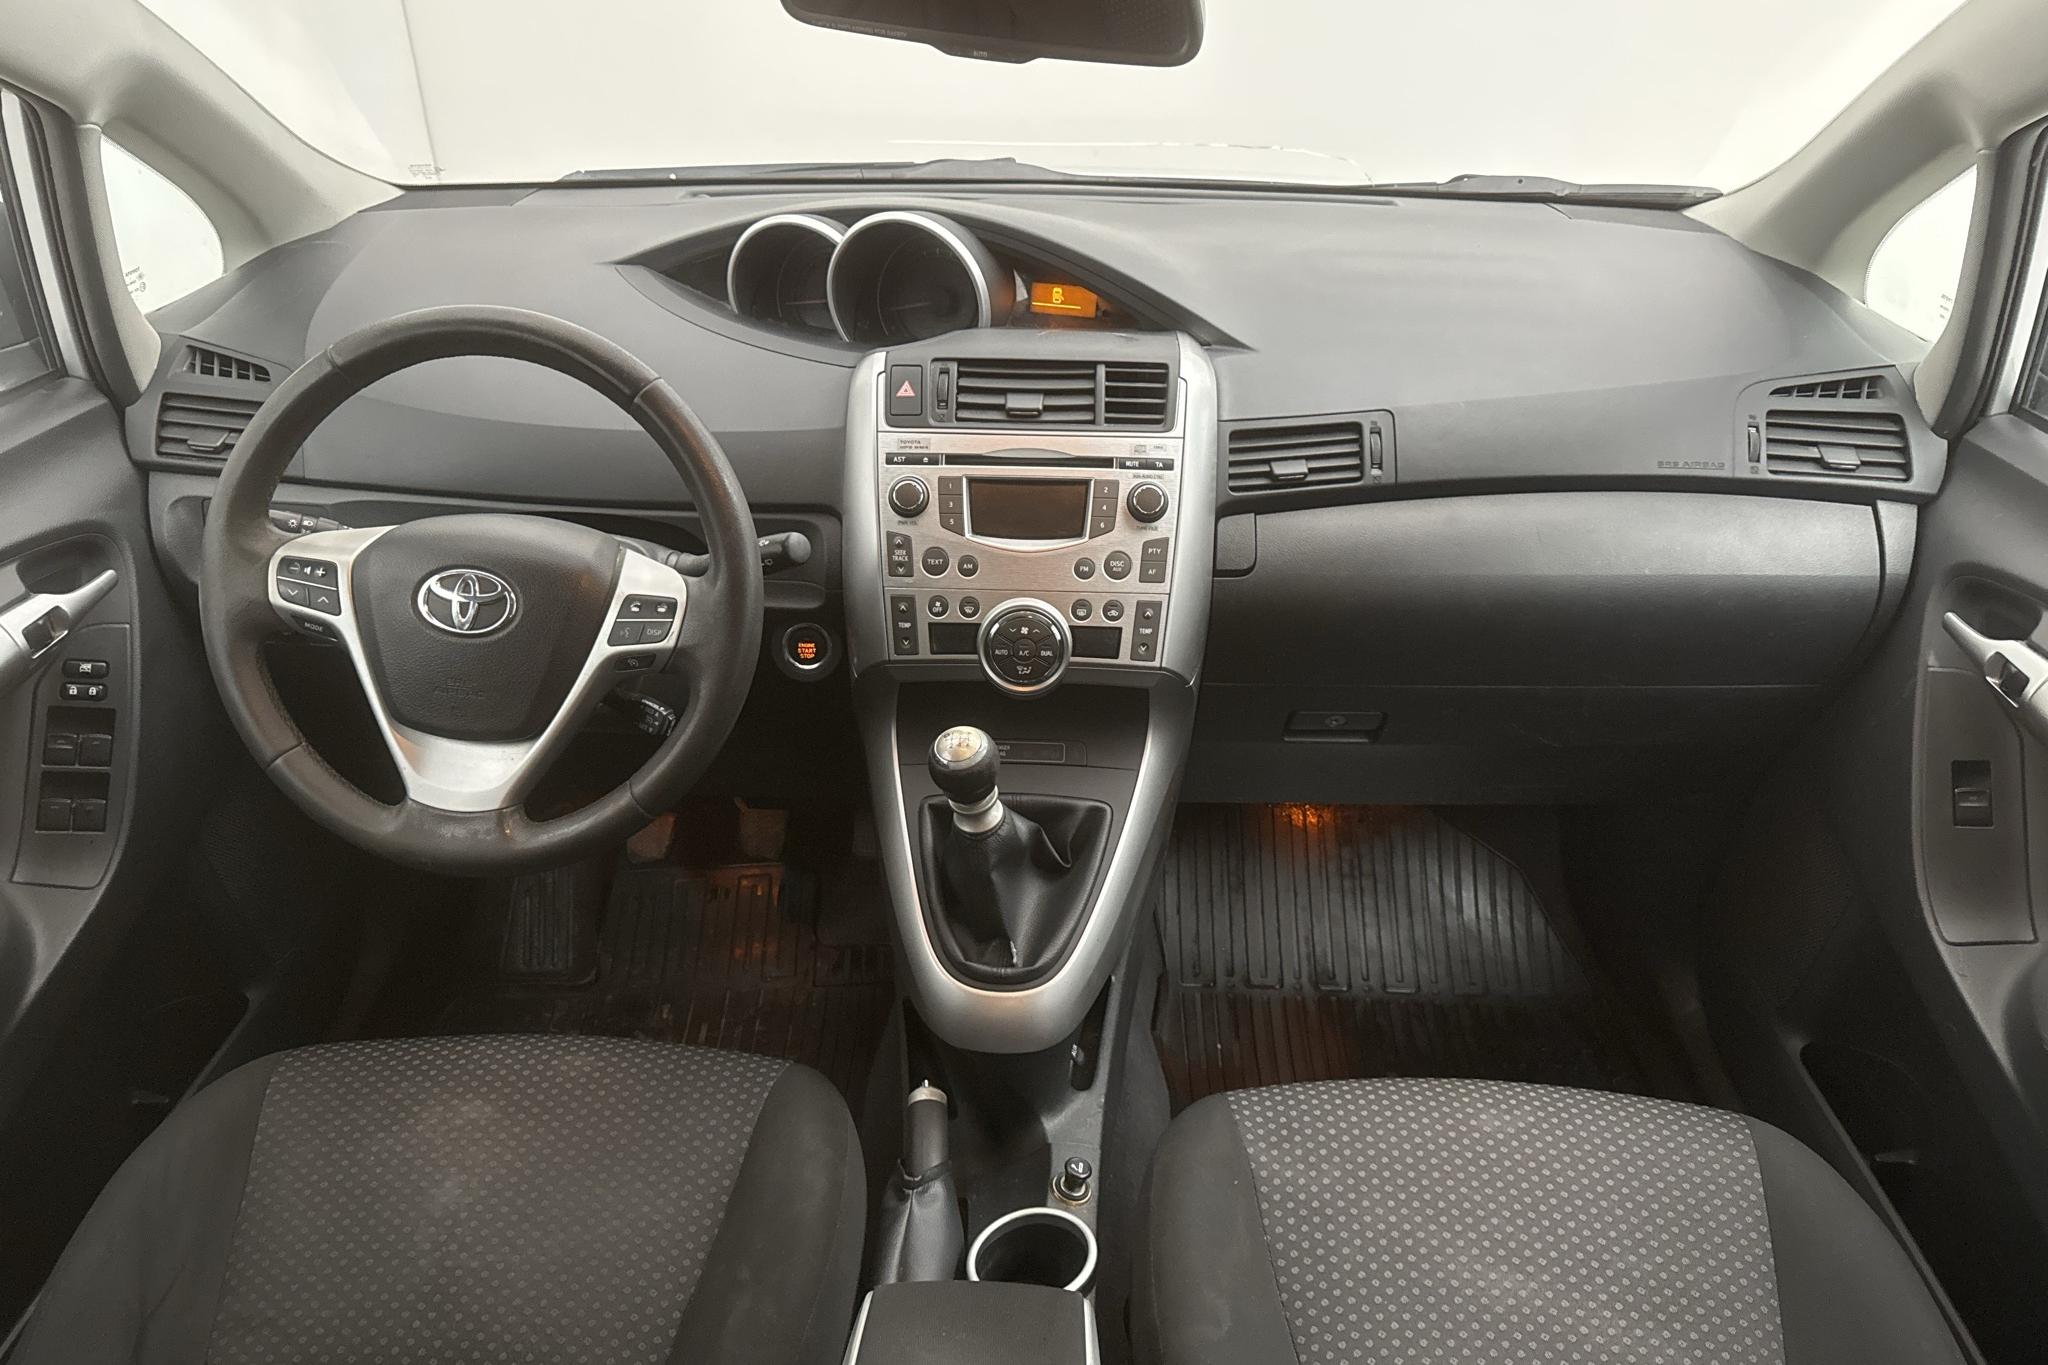 Toyota Verso 1.8 (147hk) - 23 209 mil - Manuell - silver - 2010